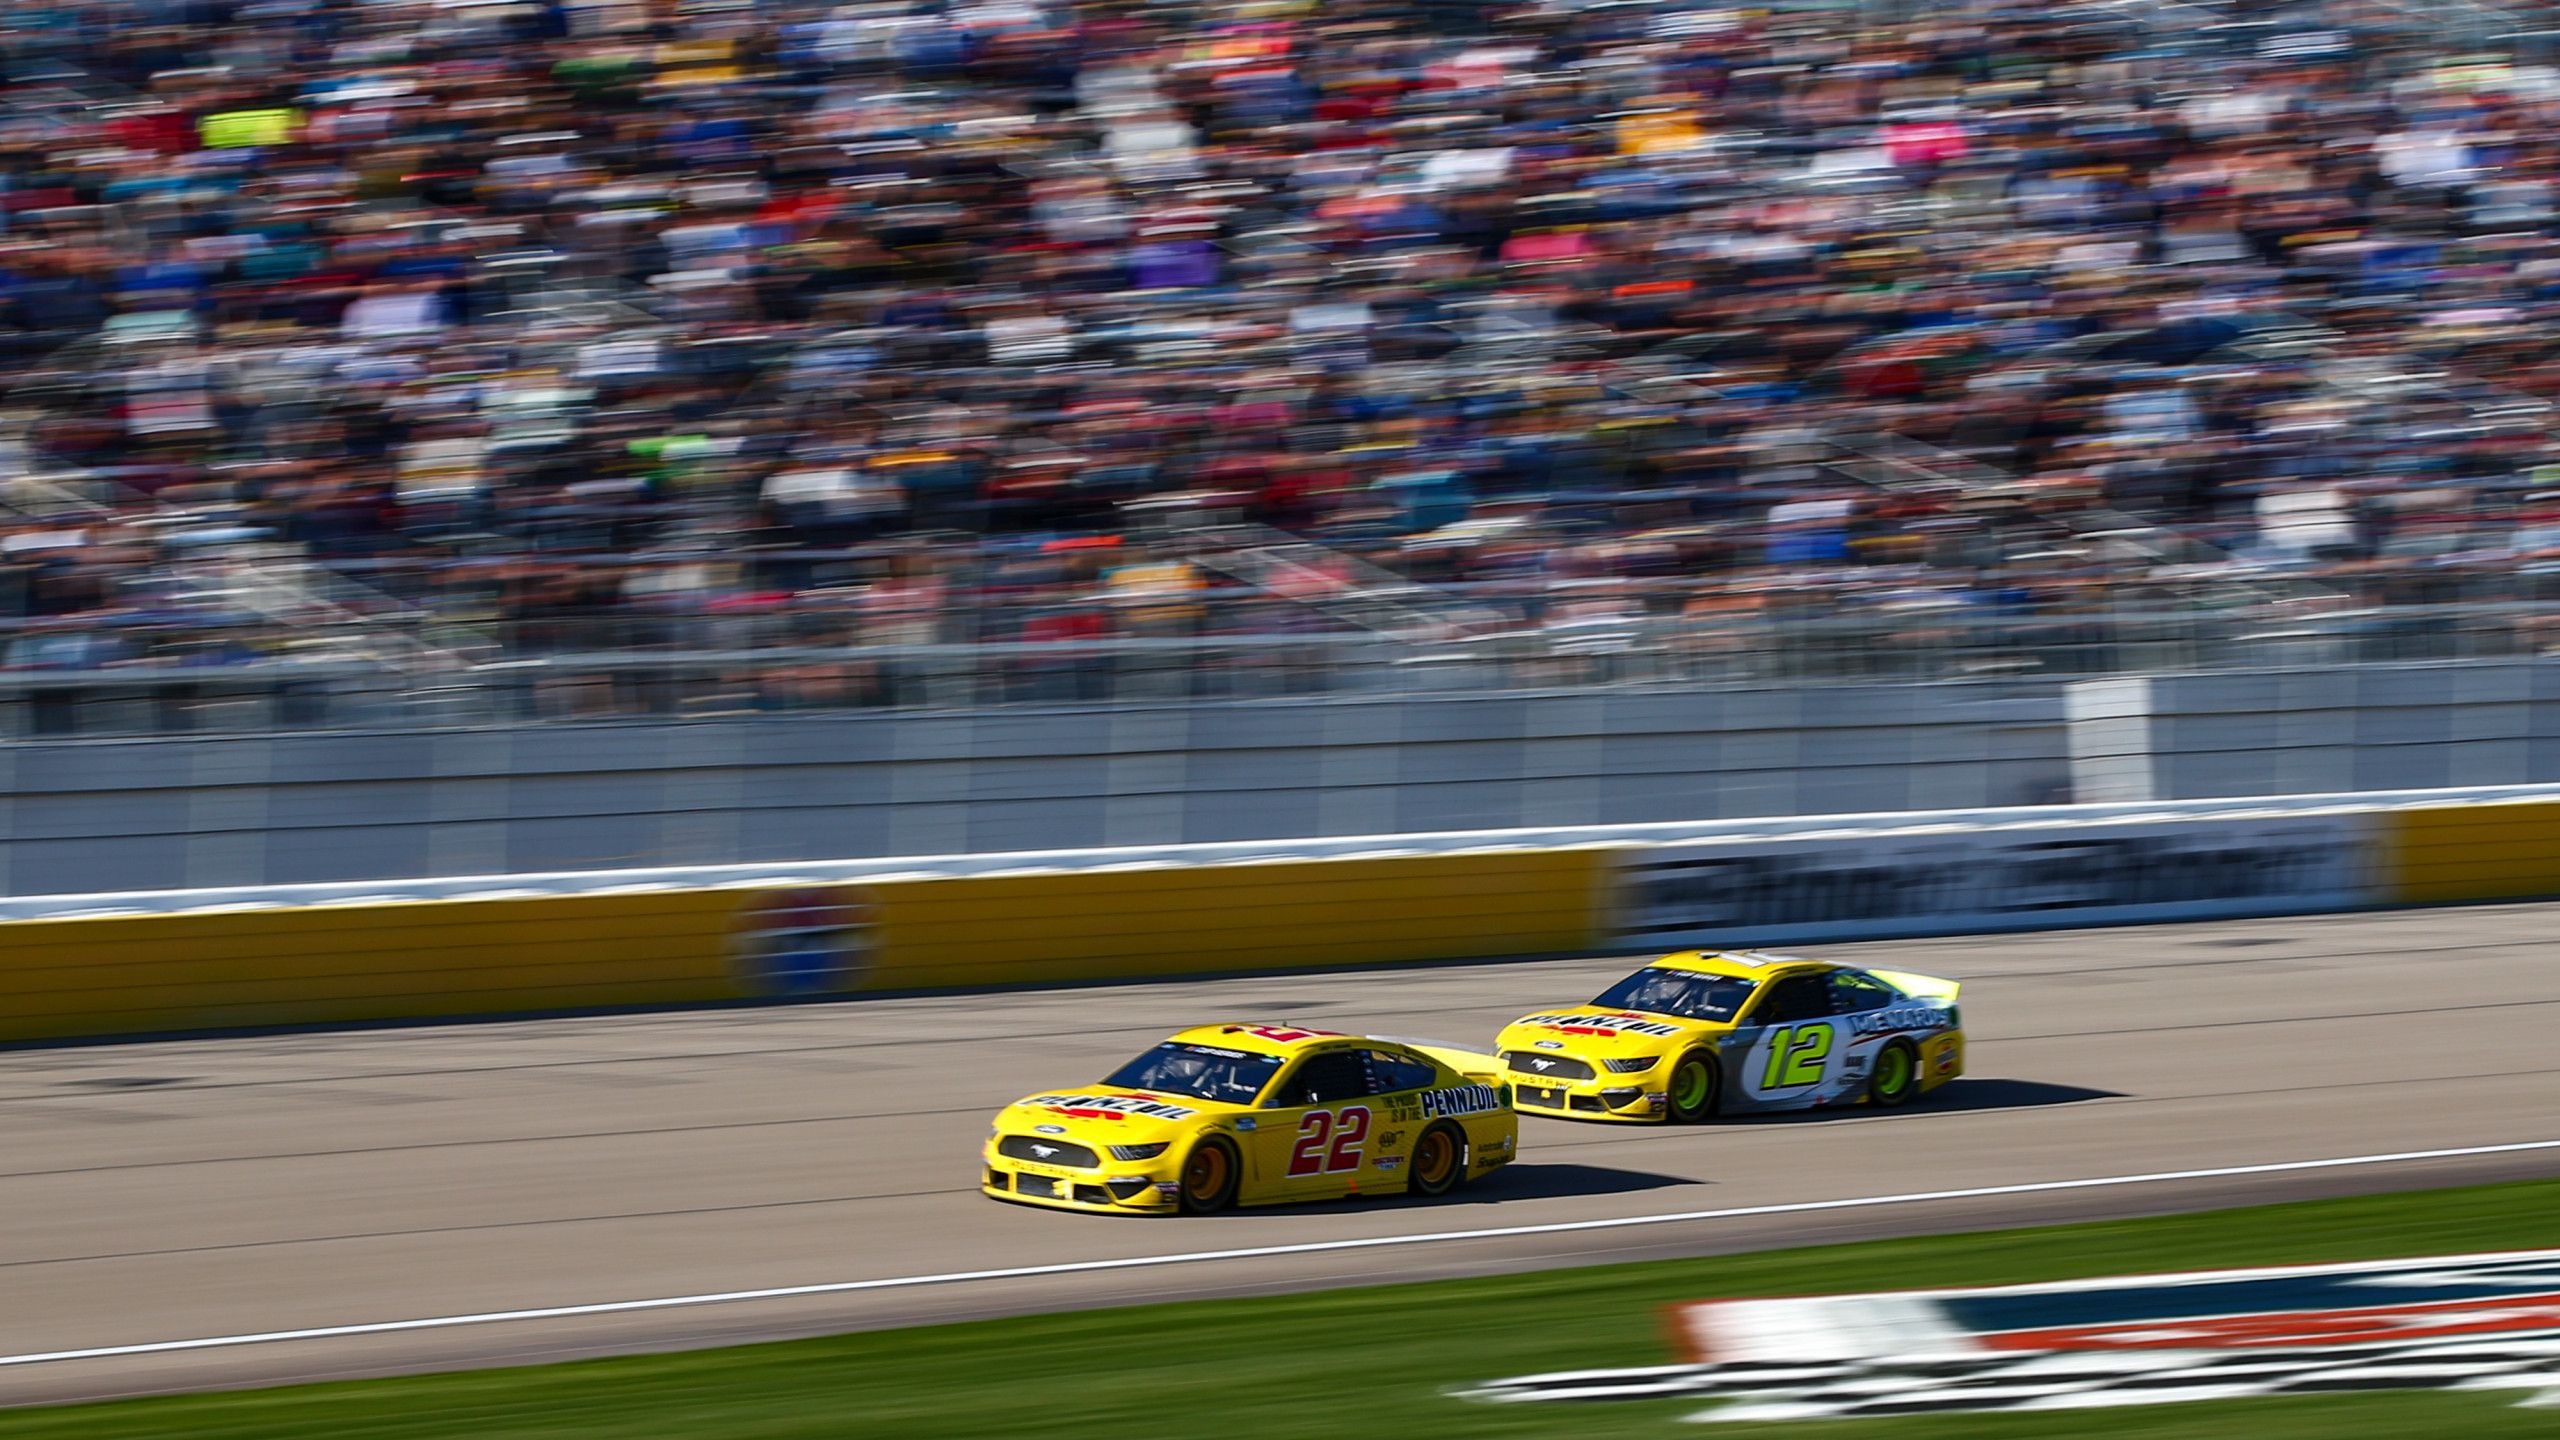 Joey Logano overcomes missed pit call to win at Las Vegas